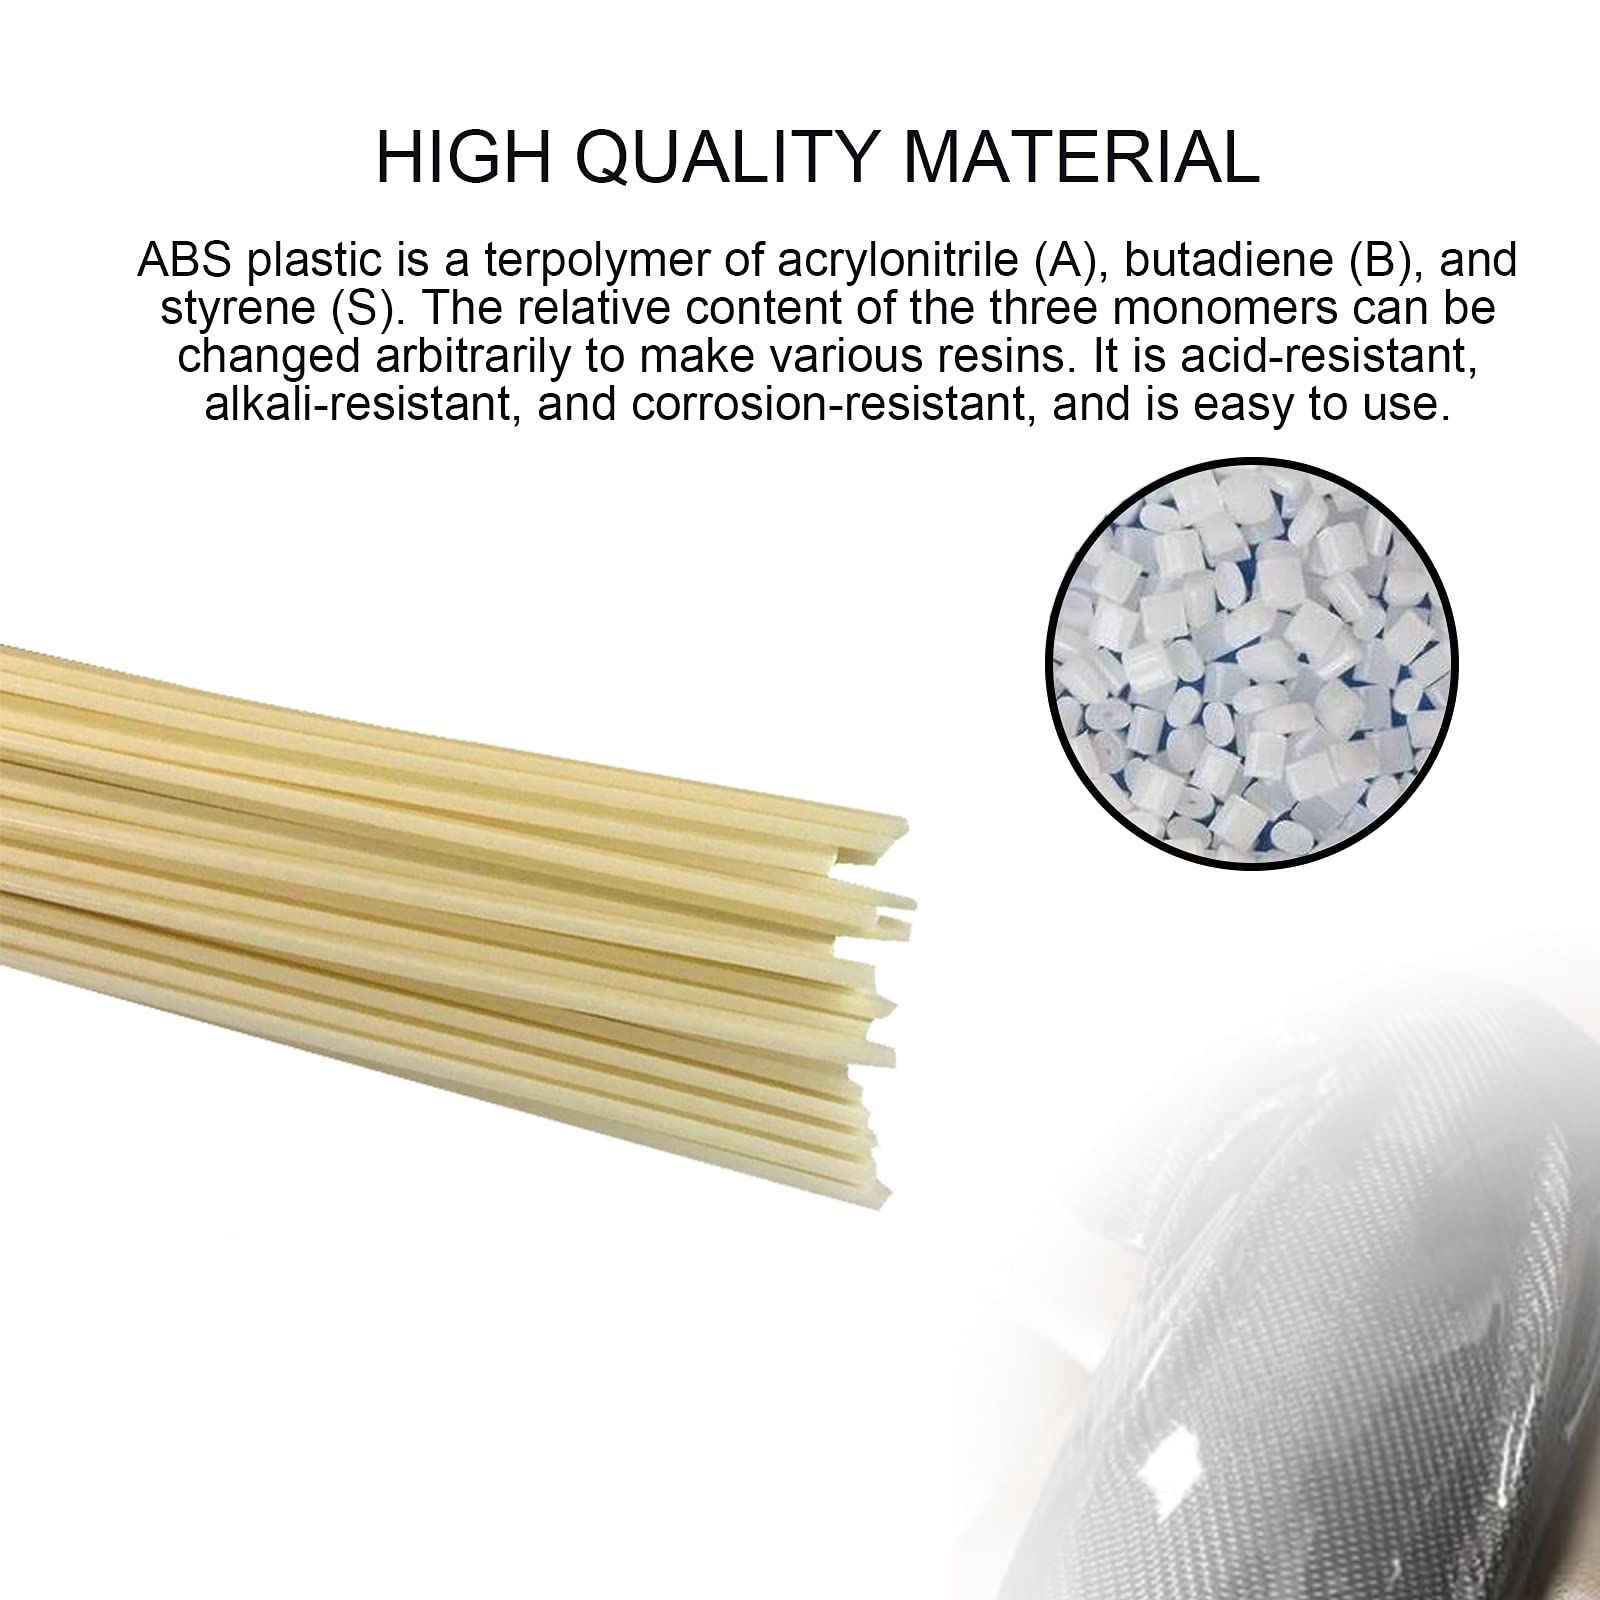 HRTX 11 lb ABS Plastic Welder Rods, Plastic Welding Rods, Double Strand Plastic Rods for Automotive Interior Panels, Battery Car/Motorcycle Shells, Long 39.37 in